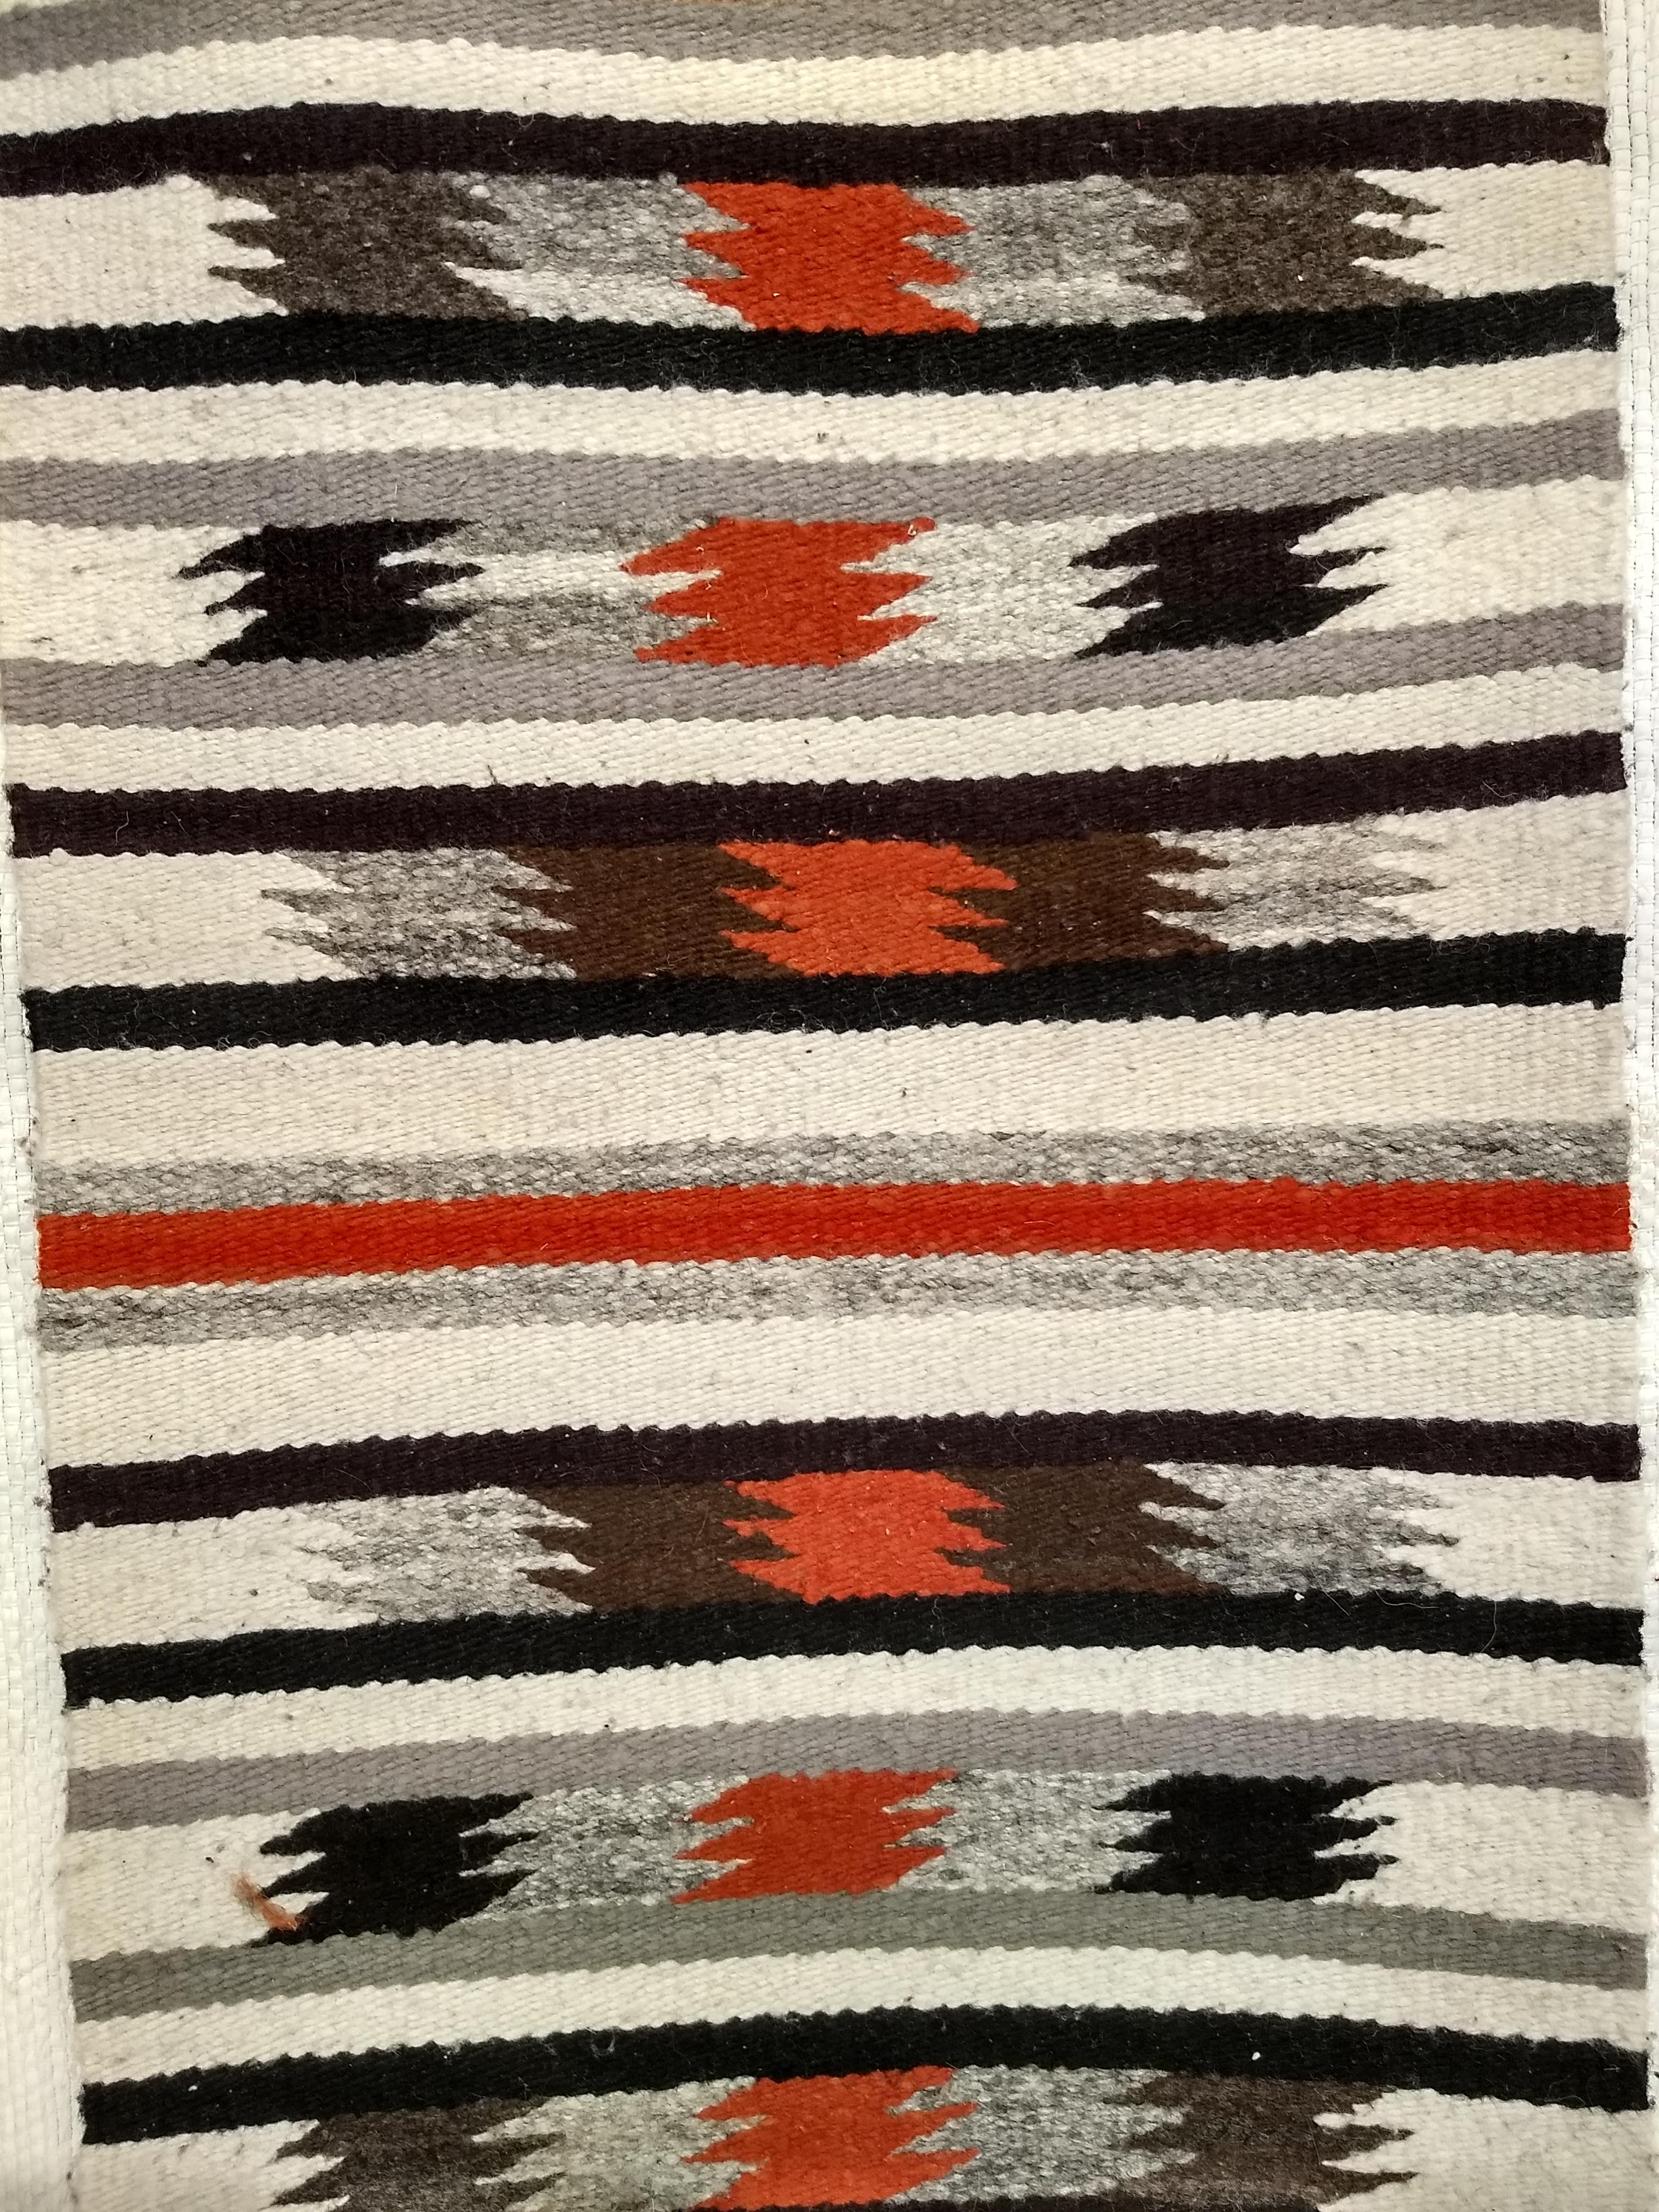 Wonderful vintage Native American Navajo rug in a stripe pattern with southwestern desert colors including gray, black, ivory, and rust-red.  It is perfect as wall art or display on a table. 
Navajo rugs are generally flat woven with wool for the